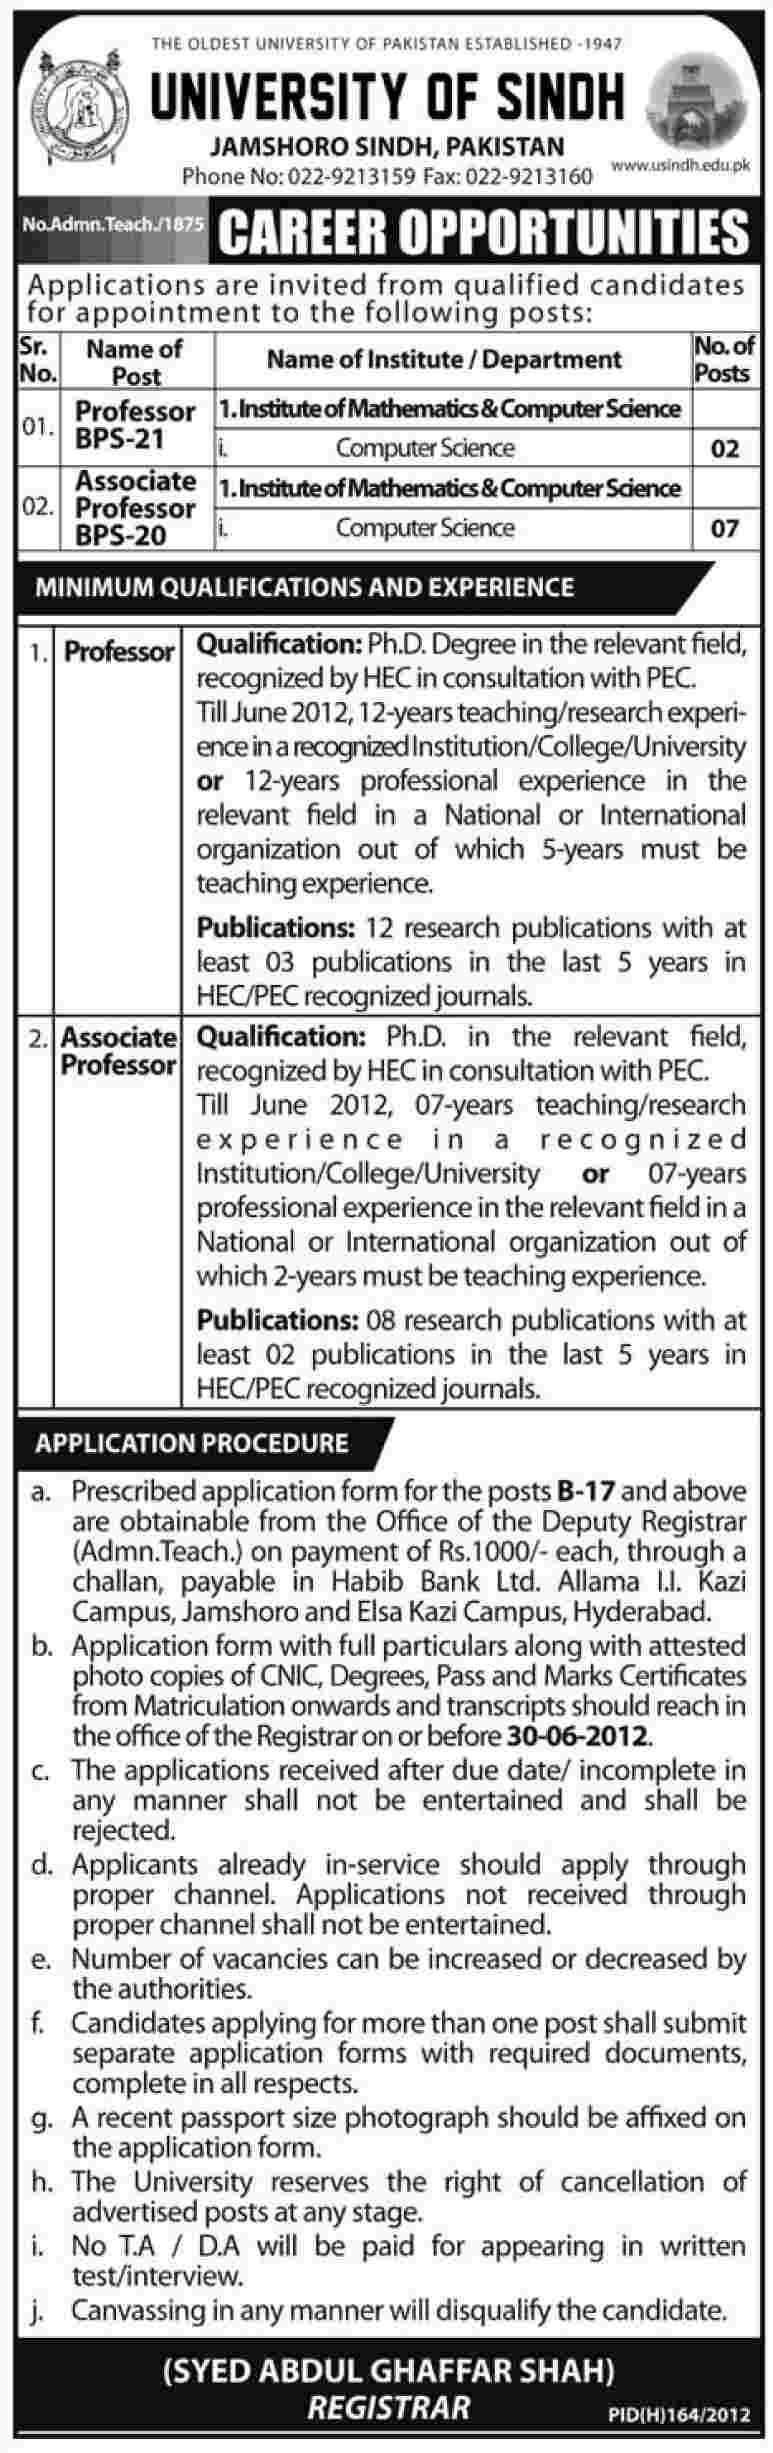 Teaching Faculty Required at University of Sindh (Govt. job)